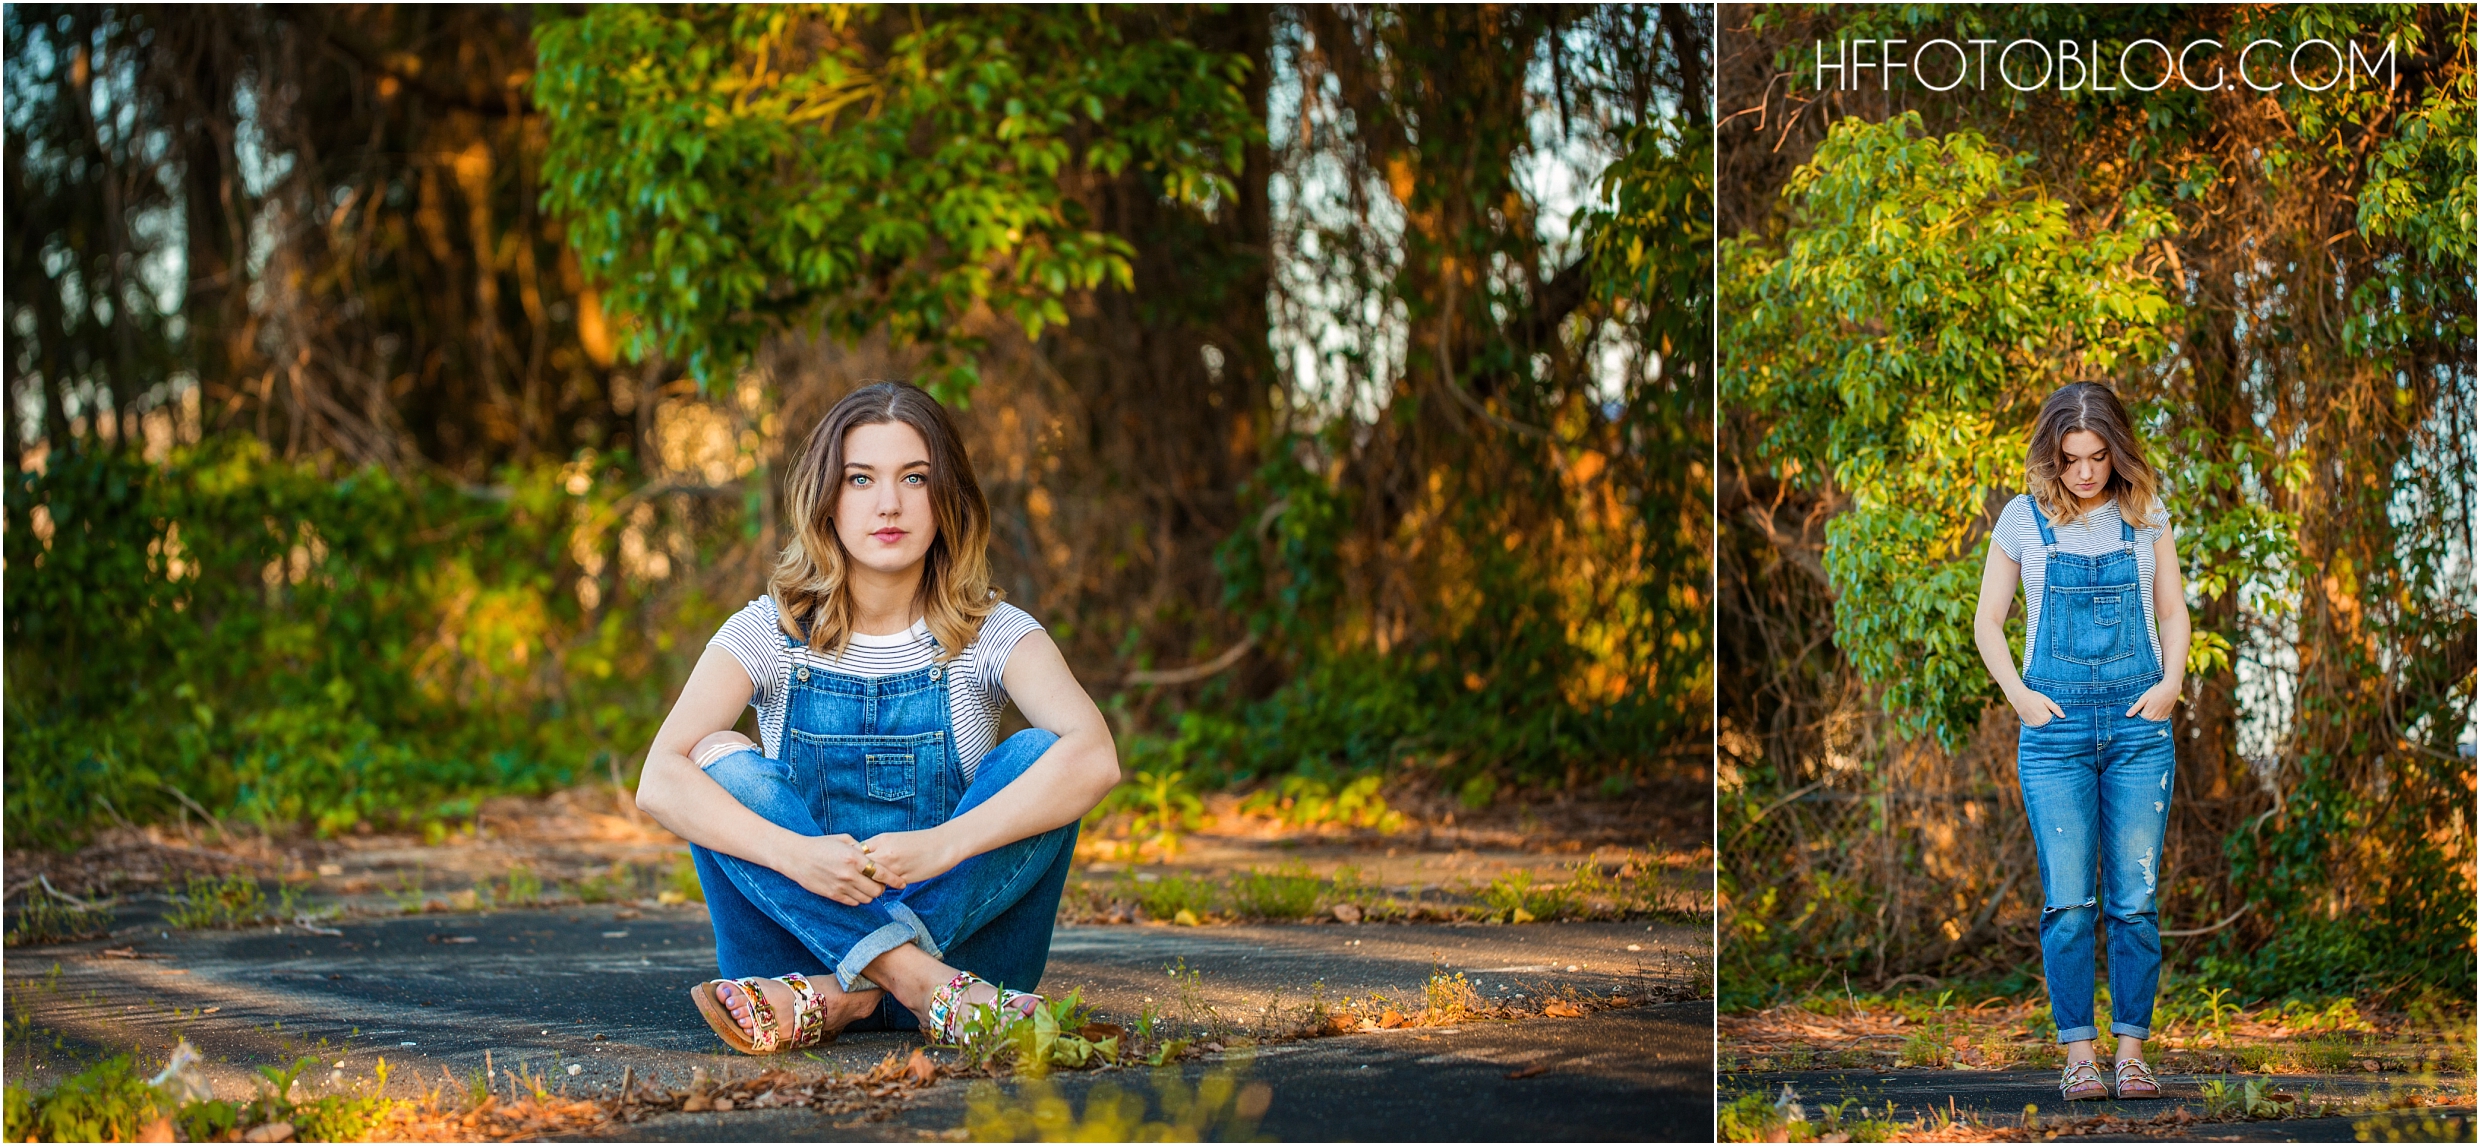 HF Photography, lake charles, lake charles photographer, lake charles senior photographer, lake charles senior shoot, senior session, moss bluff senior, boho senior shoot, boho senior session, hippy senior shoot, hippy senior session, overall senior shoot, overalls, cap and gown, graduation, class of 16, 2016, class of 2016, sam houston high school class of 16, downtown lake chalres, downtown lake charles senior session, vintage senior photos, maggie the deer, peace sign senior photos,